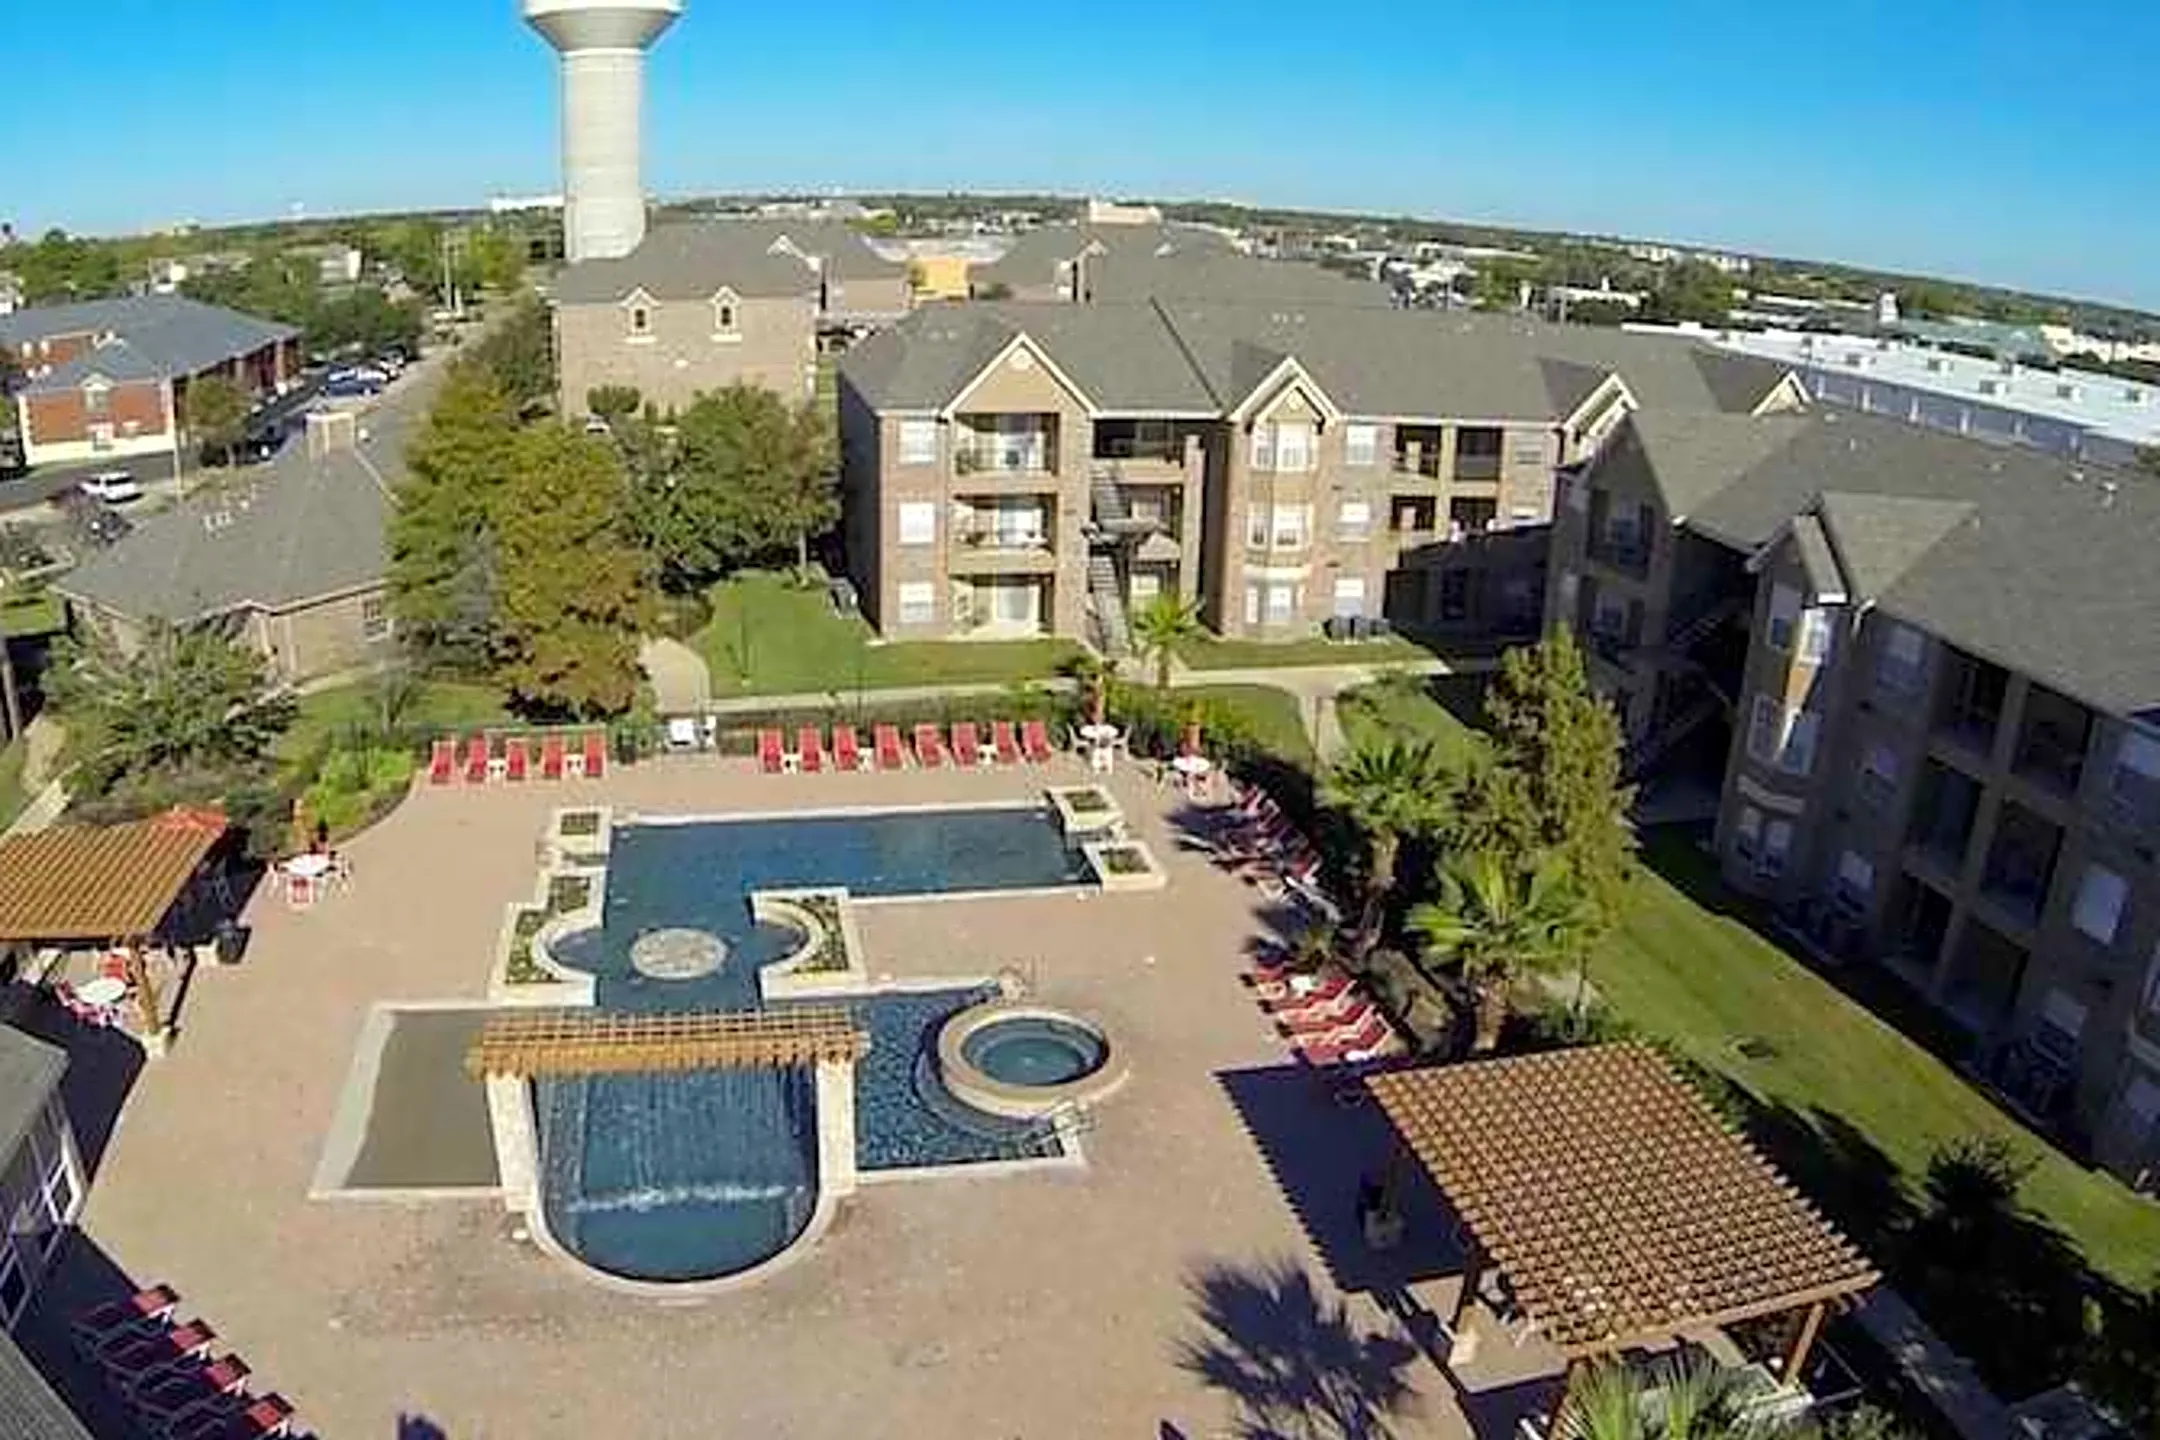 Pool - The Enclave - College Station, TX